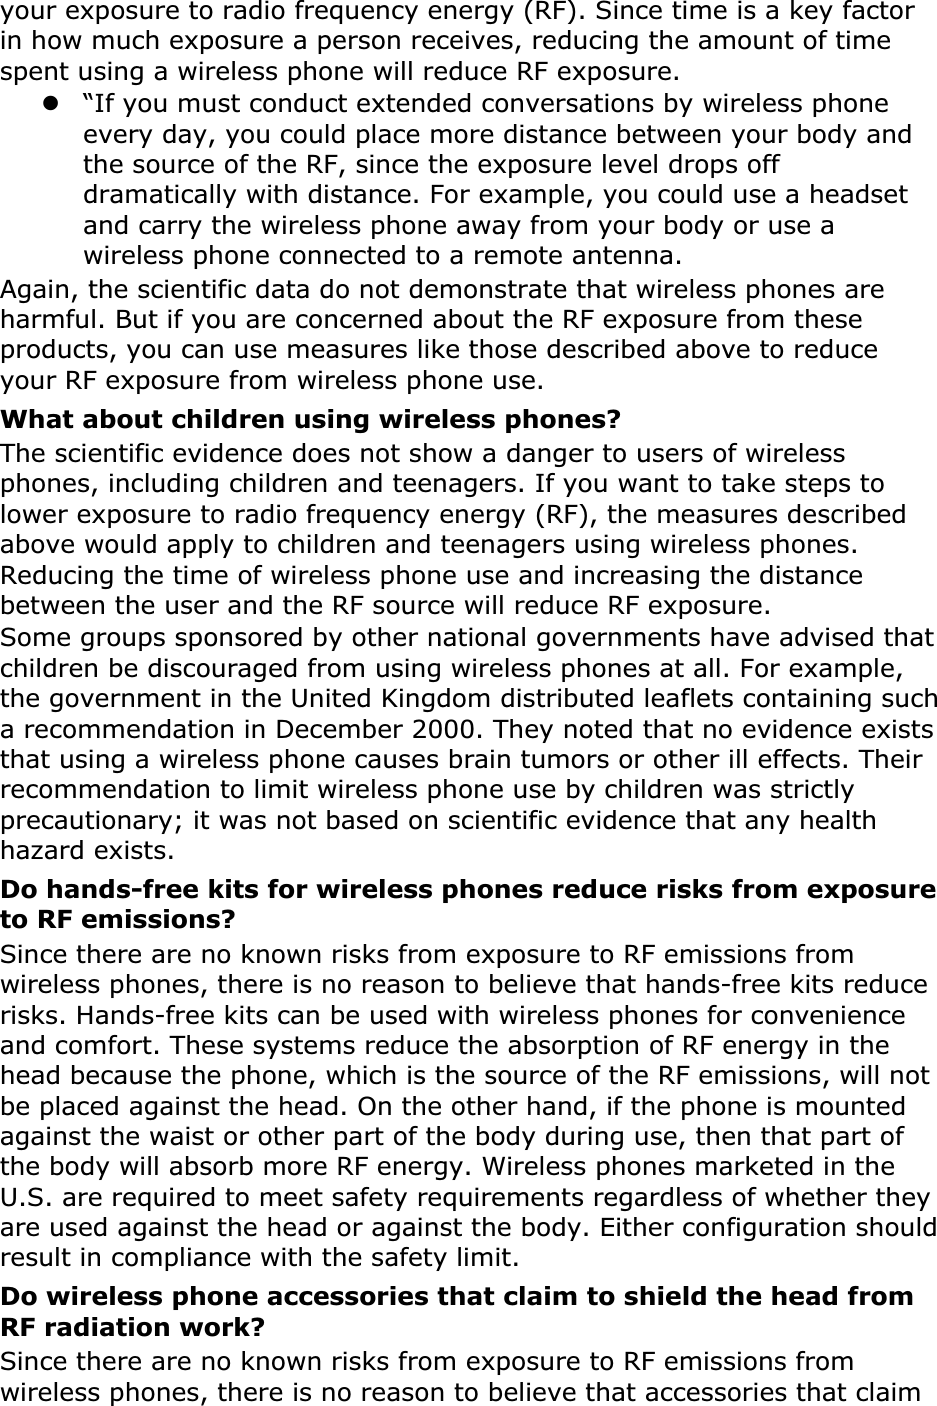 your exposure to radio frequency energy (RF). Since time is a key factor in how much exposure a person receives, reducing the amount of time spent using a wireless phone will reduce RF exposure.z“If you must conduct extended conversations by wireless phone every day, you could place more distance between your body and the source of the RF, since the exposure level drops off dramatically with distance. For example, you could use a headset and carry the wireless phone away from your body or use a wireless phone connected to a remote antenna.Again, the scientific data do not demonstrate that wireless phones are harmful. But if you are concerned about the RF exposure from these products, you can use measures like those described above to reduce your RF exposure from wireless phone use.What about children using wireless phones?The scientific evidence does not show a danger to users of wireless phones, including children and teenagers. If you want to take steps to lower exposure to radio frequency energy (RF), the measures described above would apply to children and teenagers using wireless phones. Reducing the time of wireless phone use and increasing the distance between the user and the RF source will reduce RF exposure.Some groups sponsored by other national governments have advised that children be discouraged from using wireless phones at all. For example, the government in the United Kingdom distributed leaflets containing such a recommendation in December 2000. They noted that no evidence exists that using a wireless phone causes brain tumors or other ill effects. Their recommendation to limit wireless phone use by children was strictly precautionary; it was not based on scientific evidence that any health hazard exists. Do hands-free kits for wireless phones reduce risks from exposure to RF emissions?Since there are no known risks from exposure to RF emissions from wireless phones, there is no reason to believe that hands-free kits reduce risks. Hands-free kits can be used with wireless phones for convenience and comfort. These systems reduce the absorption of RF energy in the head because the phone, which is the source of the RF emissions, will not be placed against the head. On the other hand, if the phone is mounted against the waist or other part of the body during use, then that part of the body will absorb more RF energy. Wireless phones marketed in the U.S. are required to meet safety requirements regardless of whether they are used against the head or against the body. Either configuration should result in compliance with the safety limit.Do wireless phone accessories that claim to shield the head from RF radiation work?Since there are no known risks from exposure to RF emissions from wireless phones, there is no reason to believe that accessories that claim 